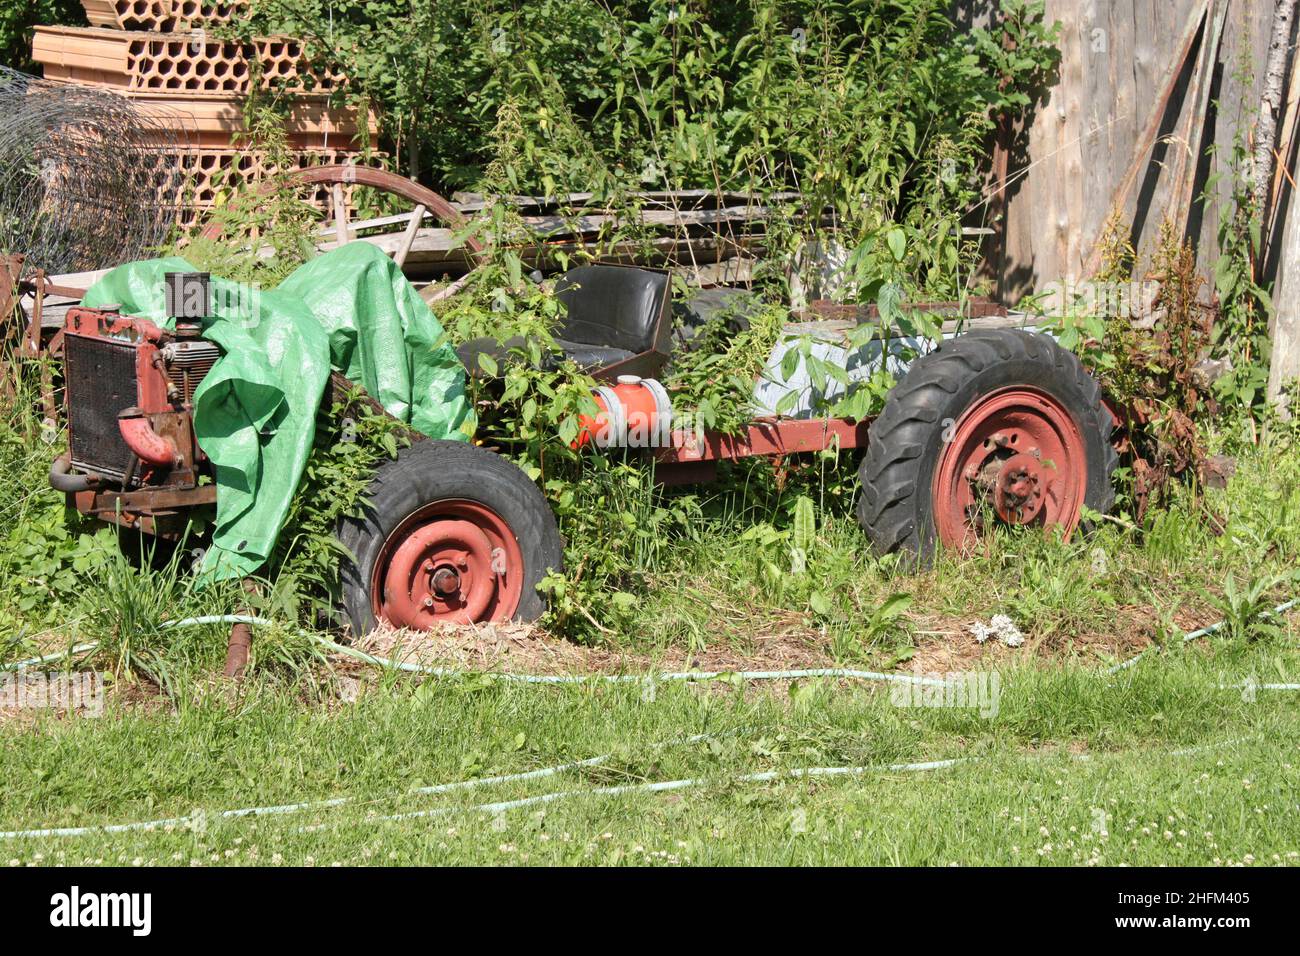 The abandoned wreck of a homemade tractor standing in the garden, overgrown with plants. Stock Photo